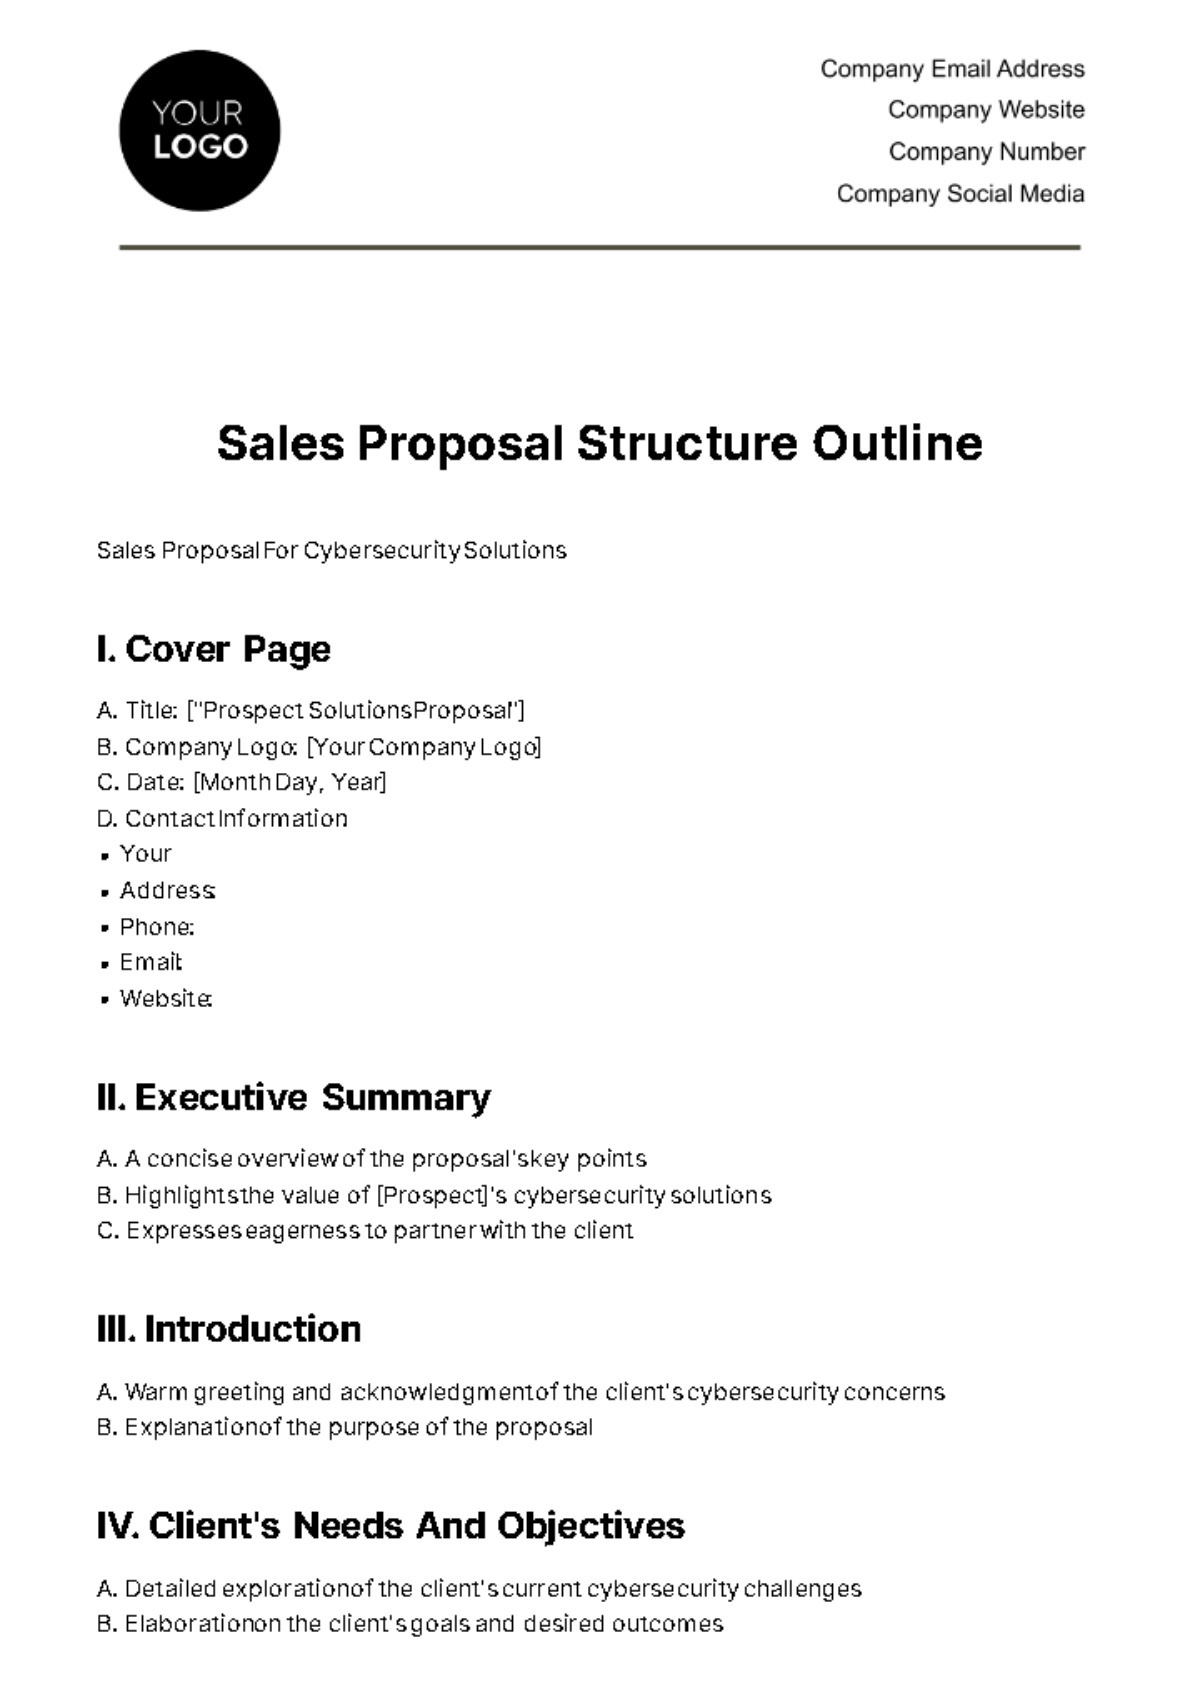 Sales Proposal Structure Outline Template